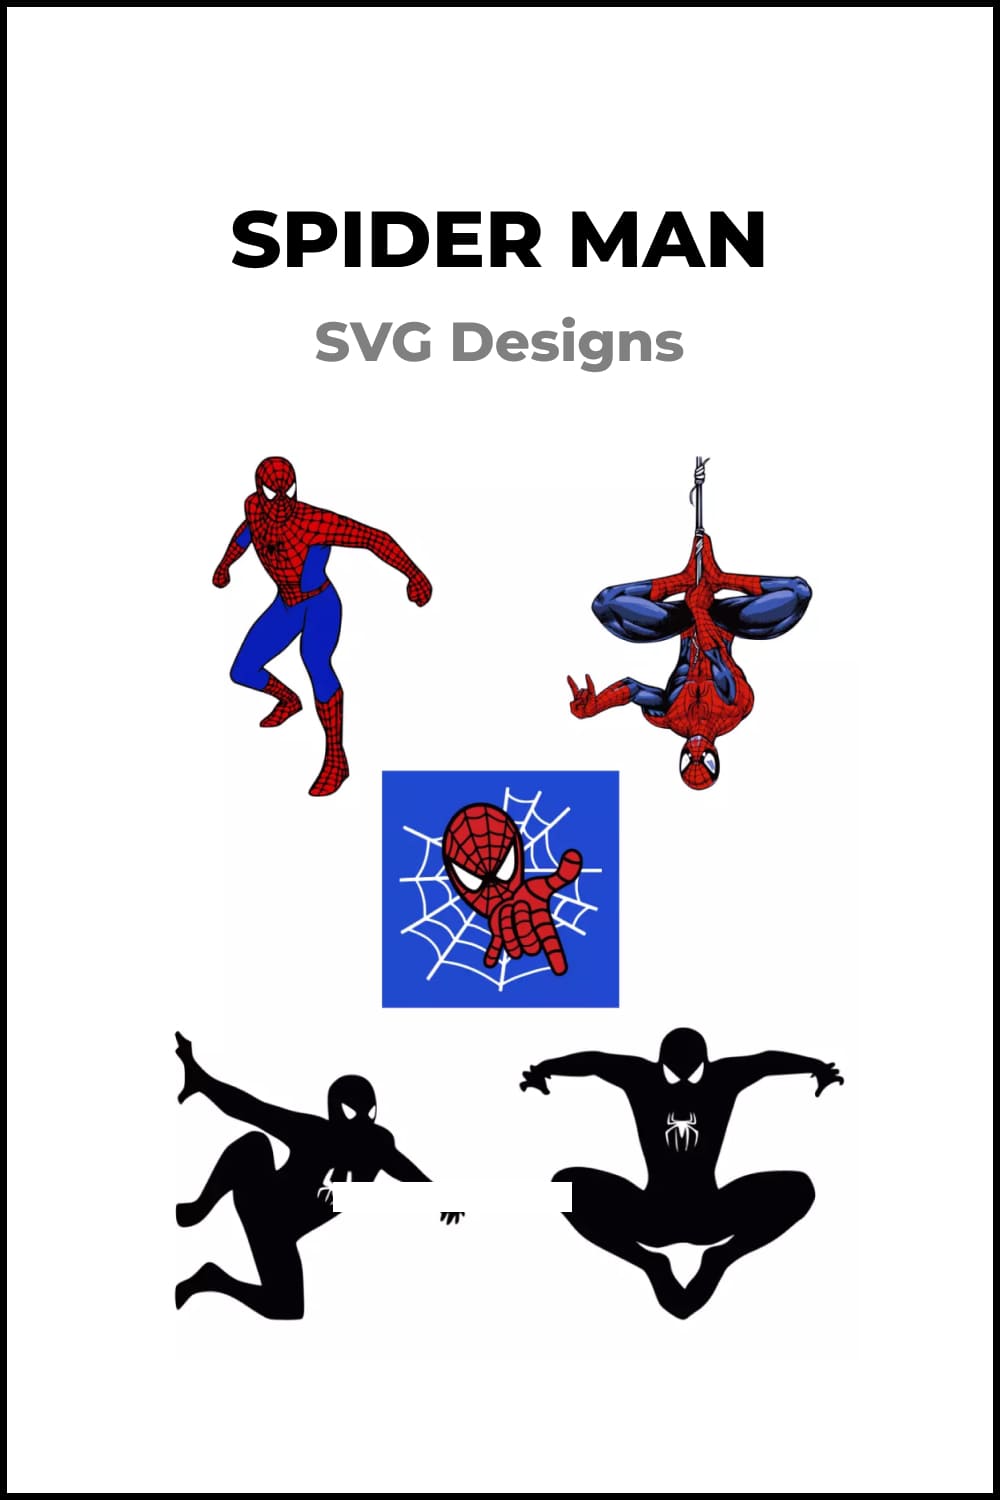 Images of spider-man in color and black version in motion.